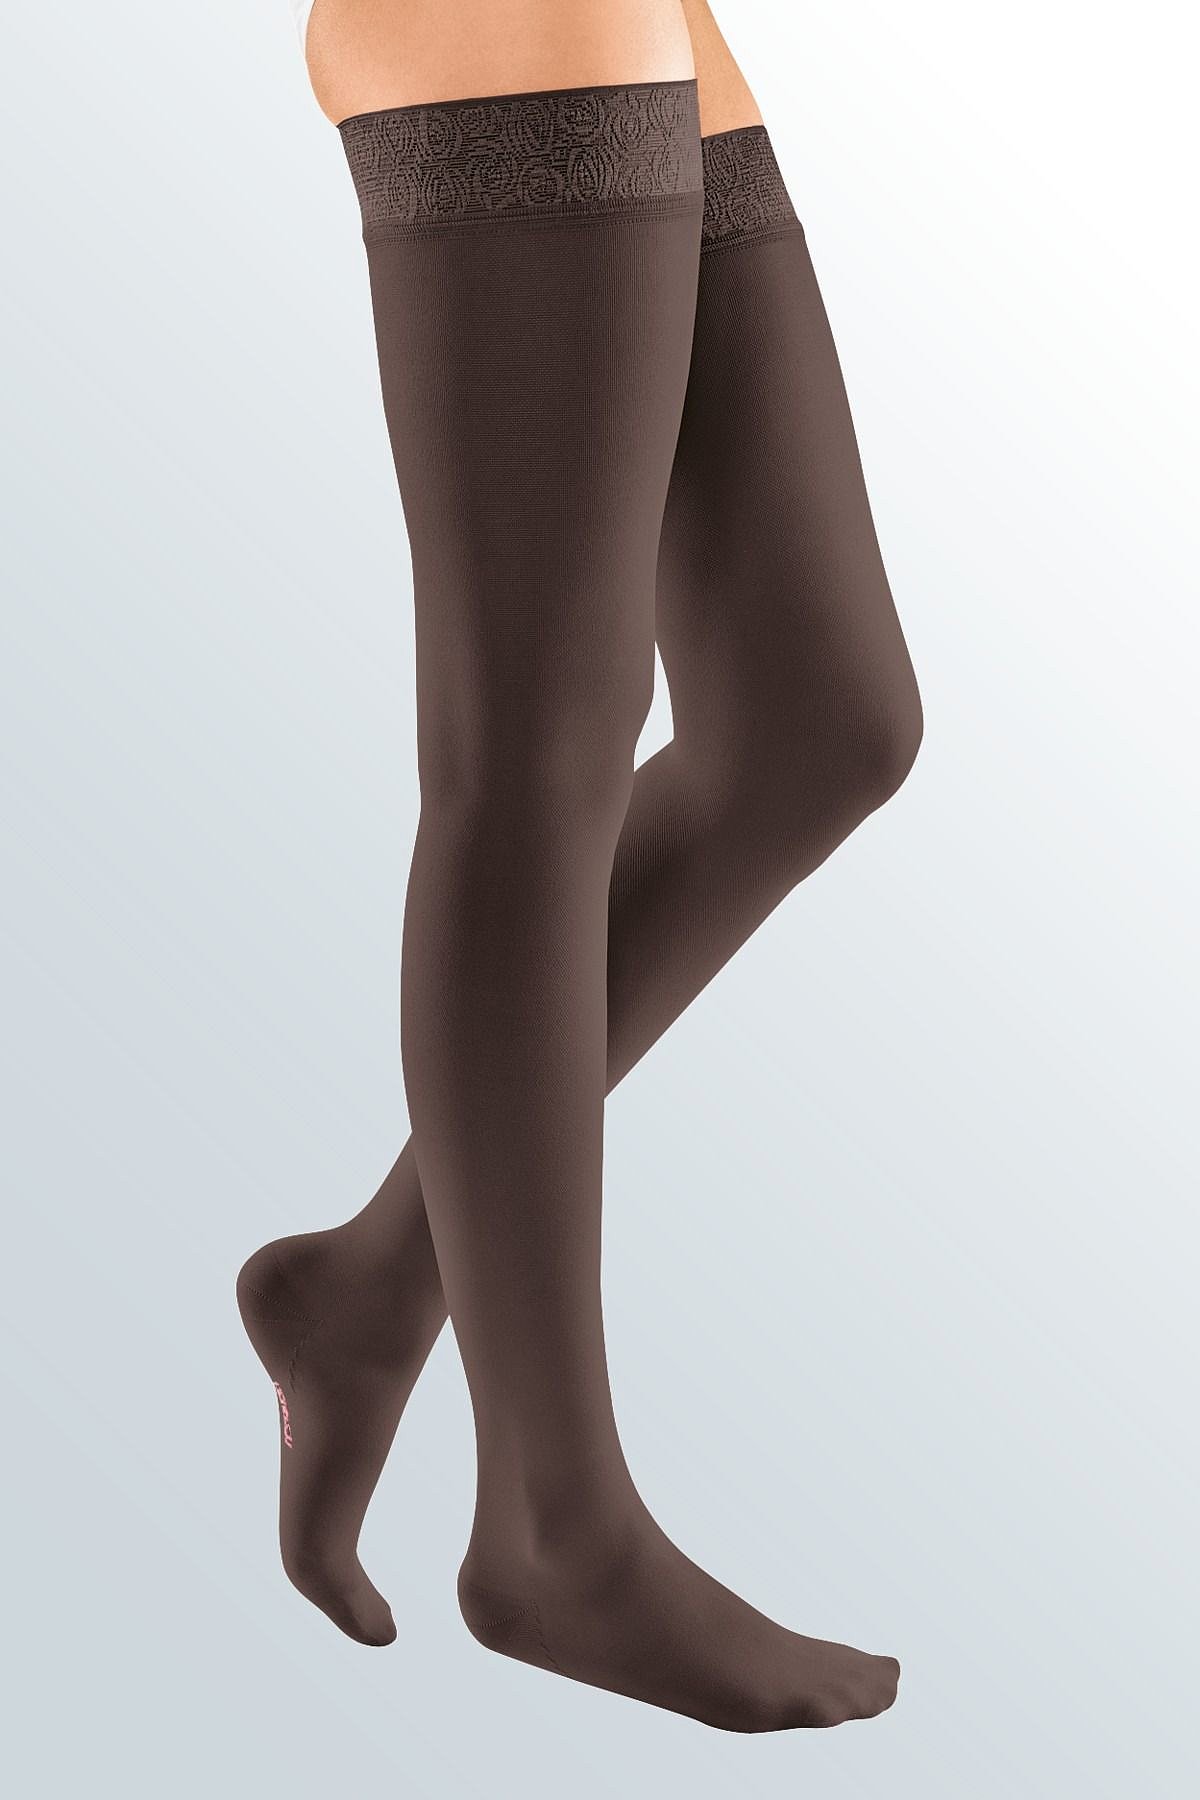 Mediven Elegance Thigh High Compression Stockings - OrthoMed Canada